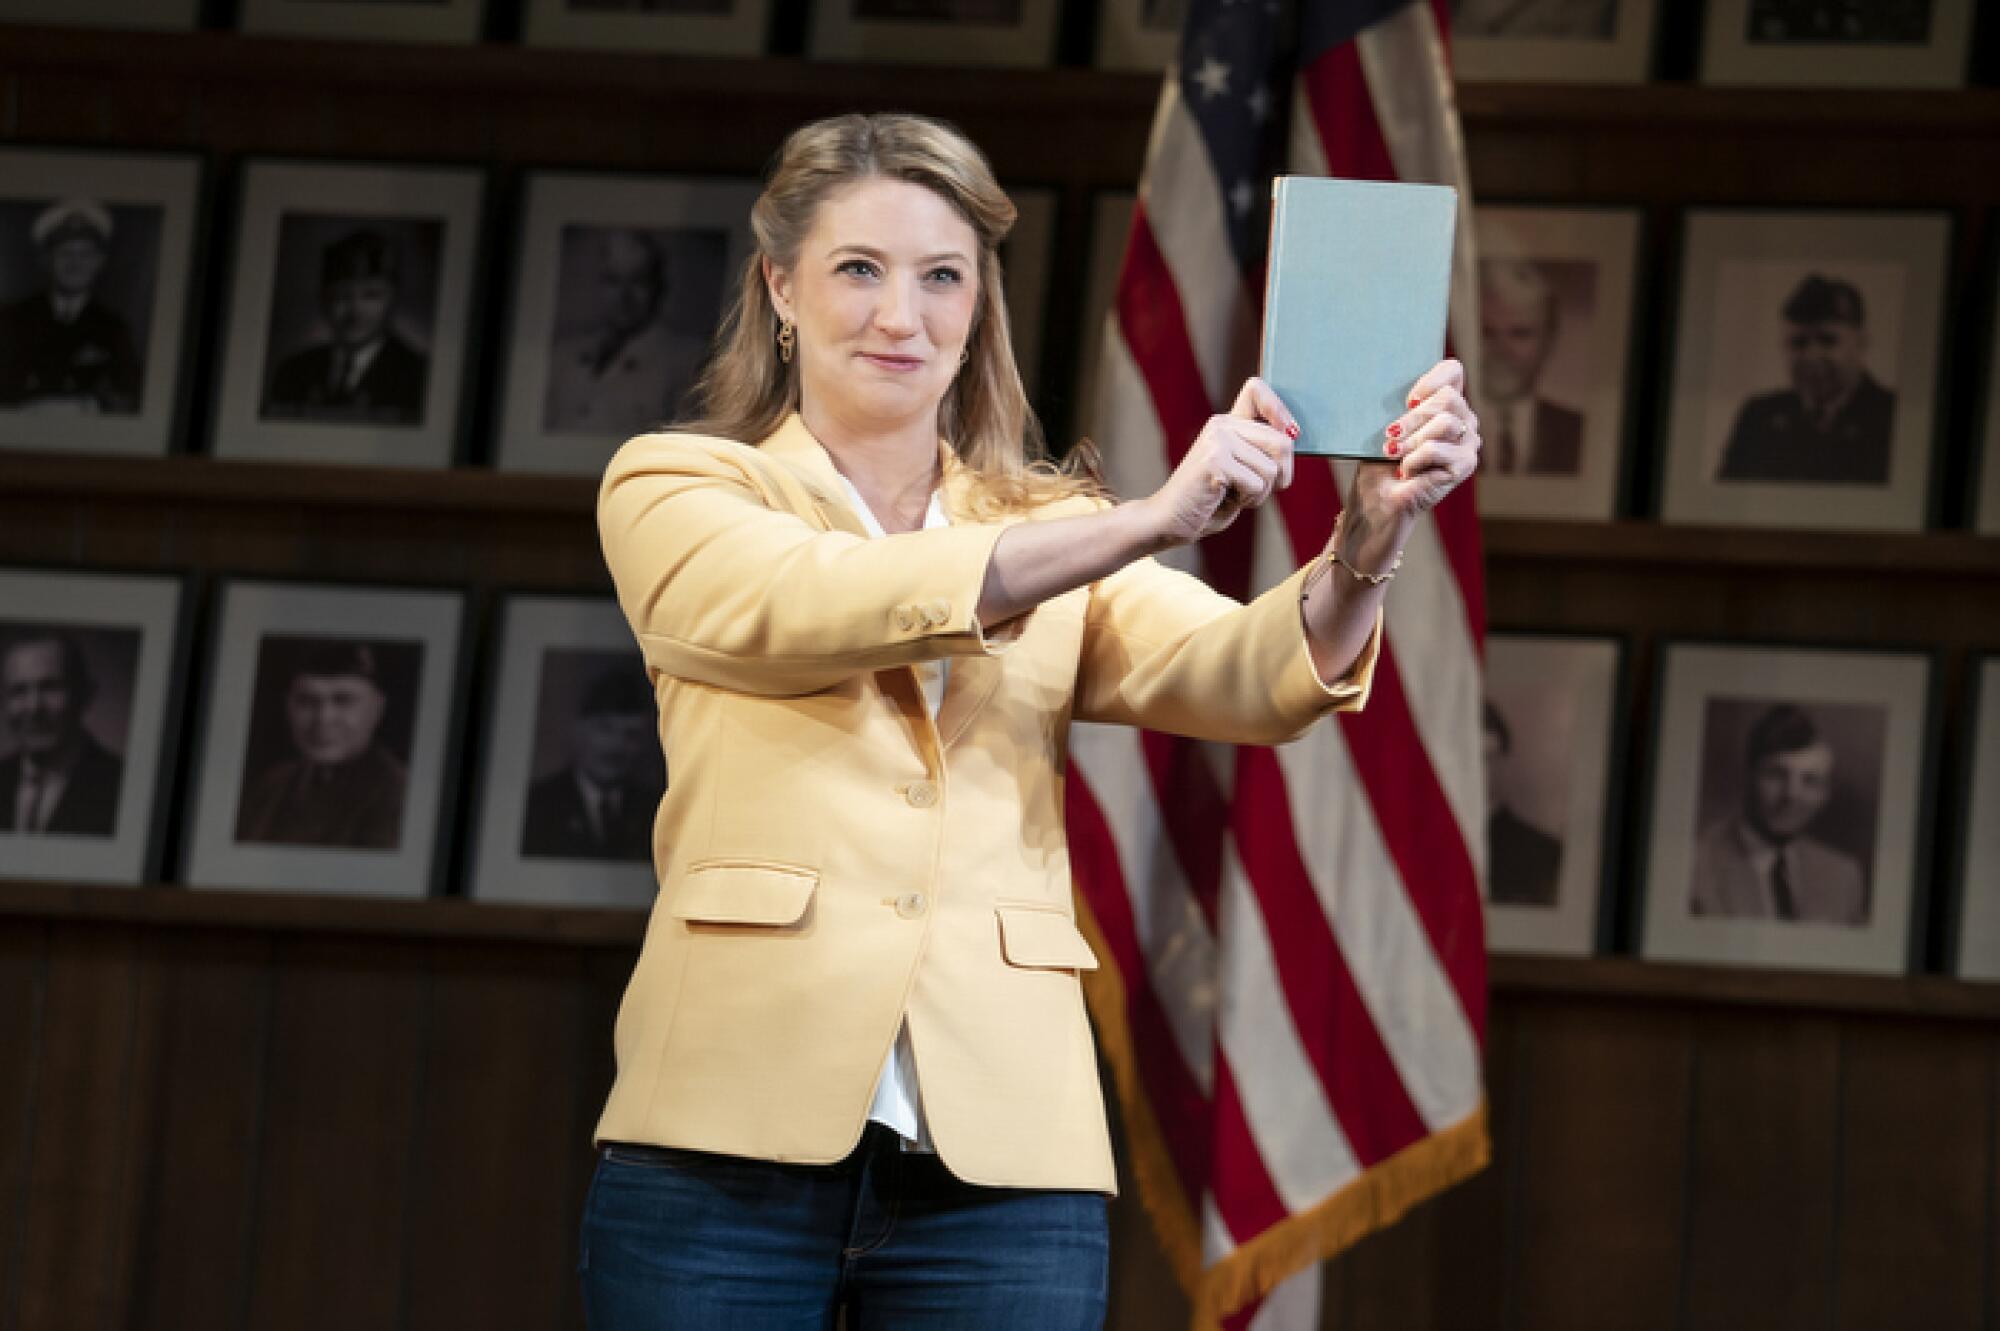 A woman in a yellow blazer and jeans holds up a book 